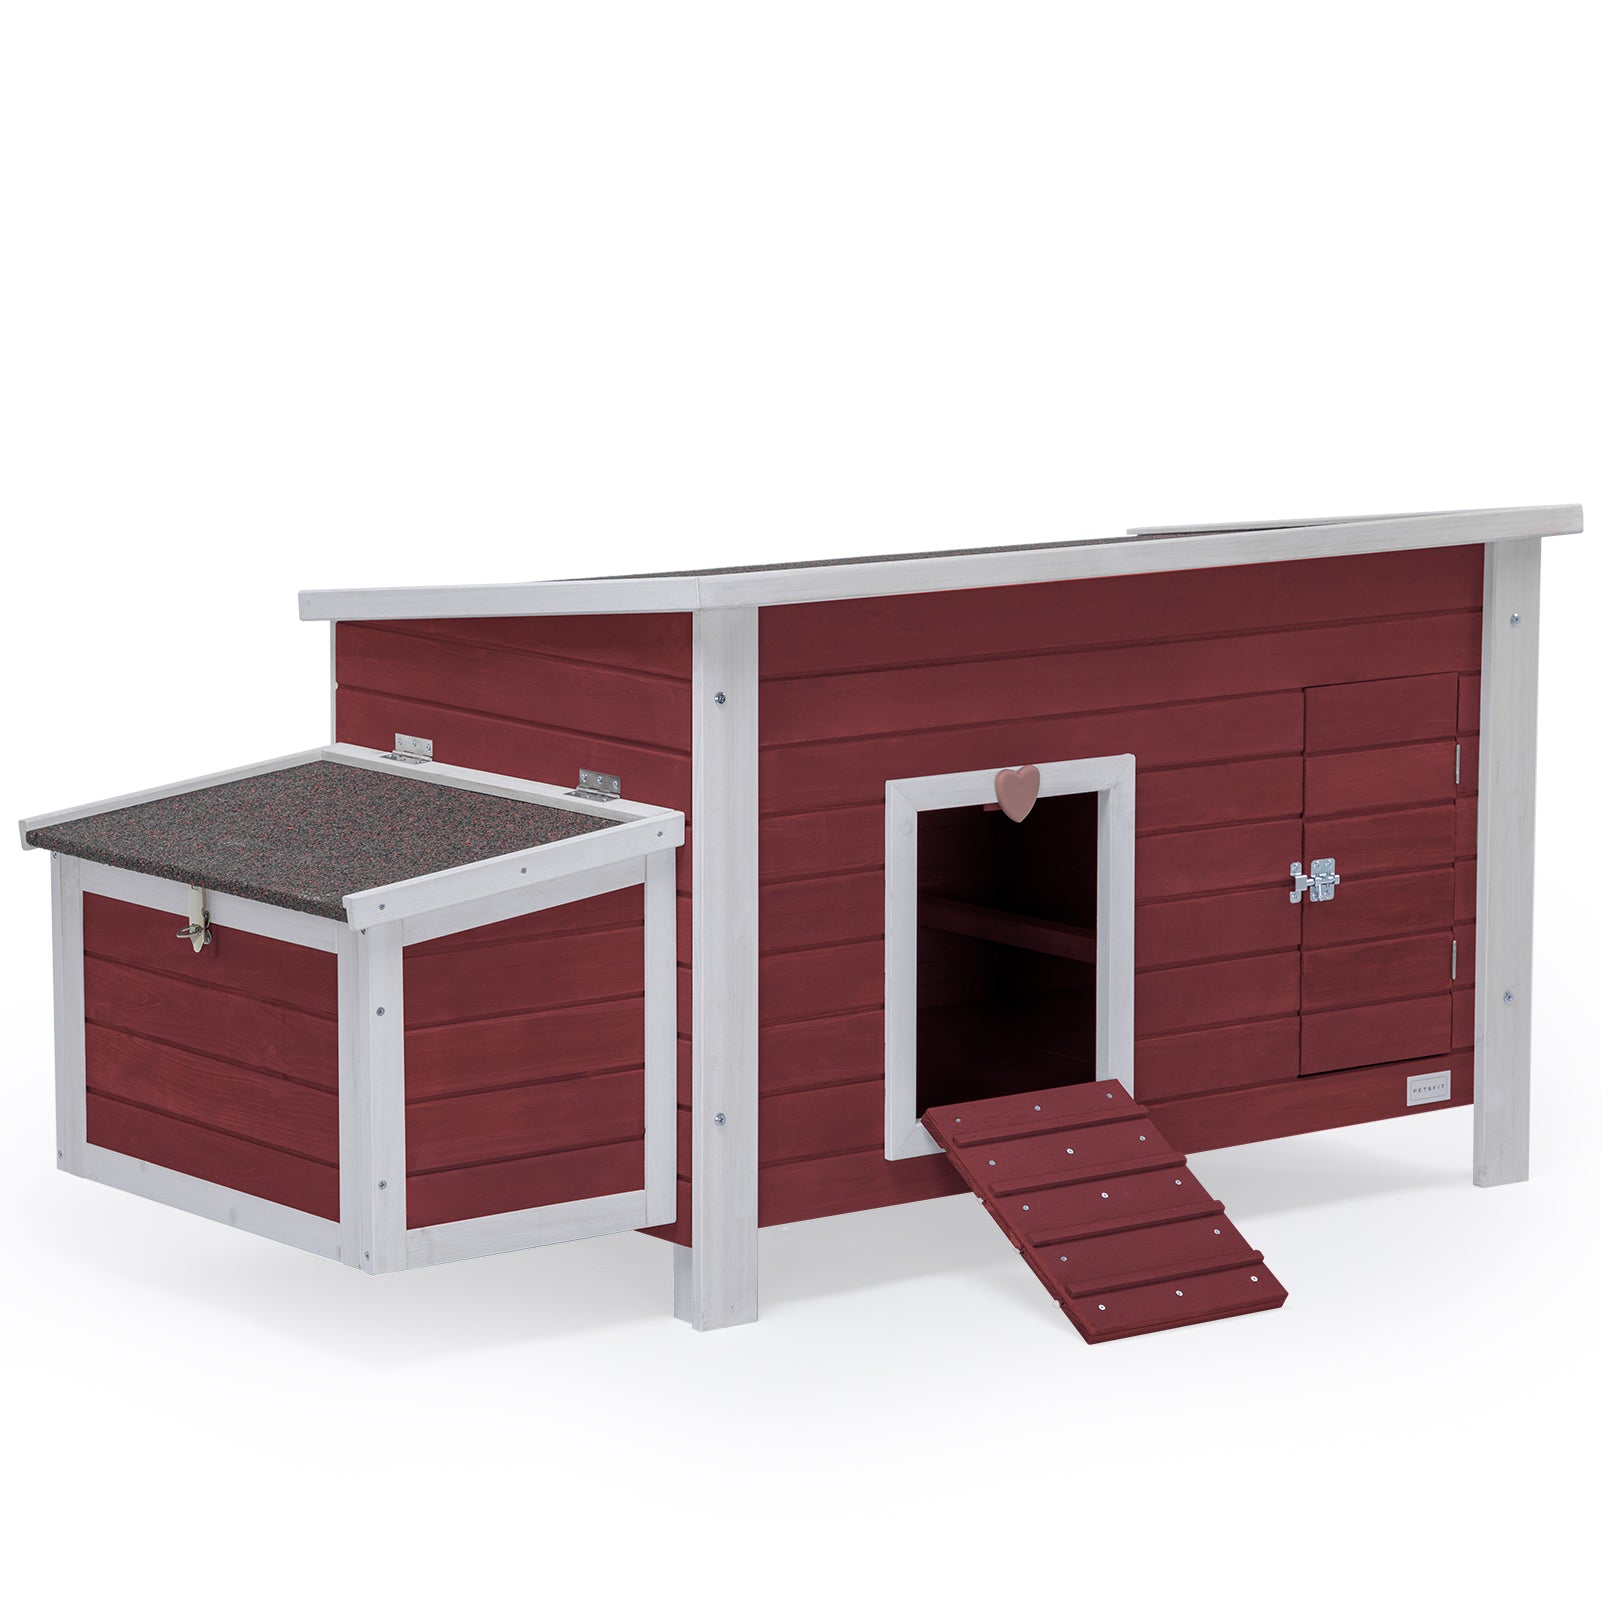 petsfit-large-chicken-coop-with-upgraded-perches-wooden-outdoor-chicken-cage-with-large-nesting-box-weatherproof-open-asphalt-roof-and-removable-bottom-for-easy-cleaning-01